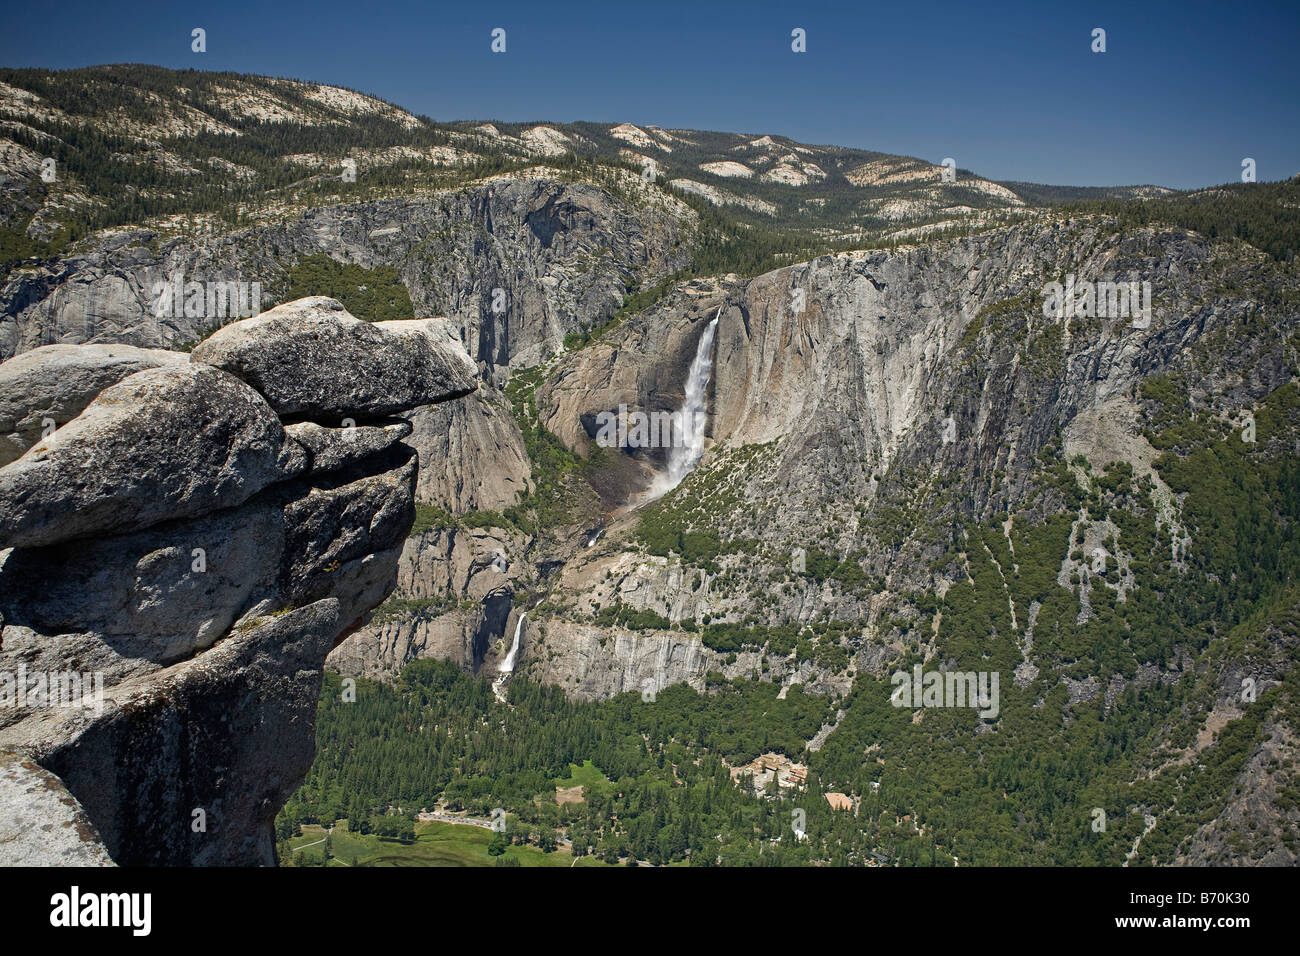 CALIFORNIA - Upper and Lower Yosemite Falls and the Yosemite Valley from Glacier Point in Yosemite National Park. Stock Photo